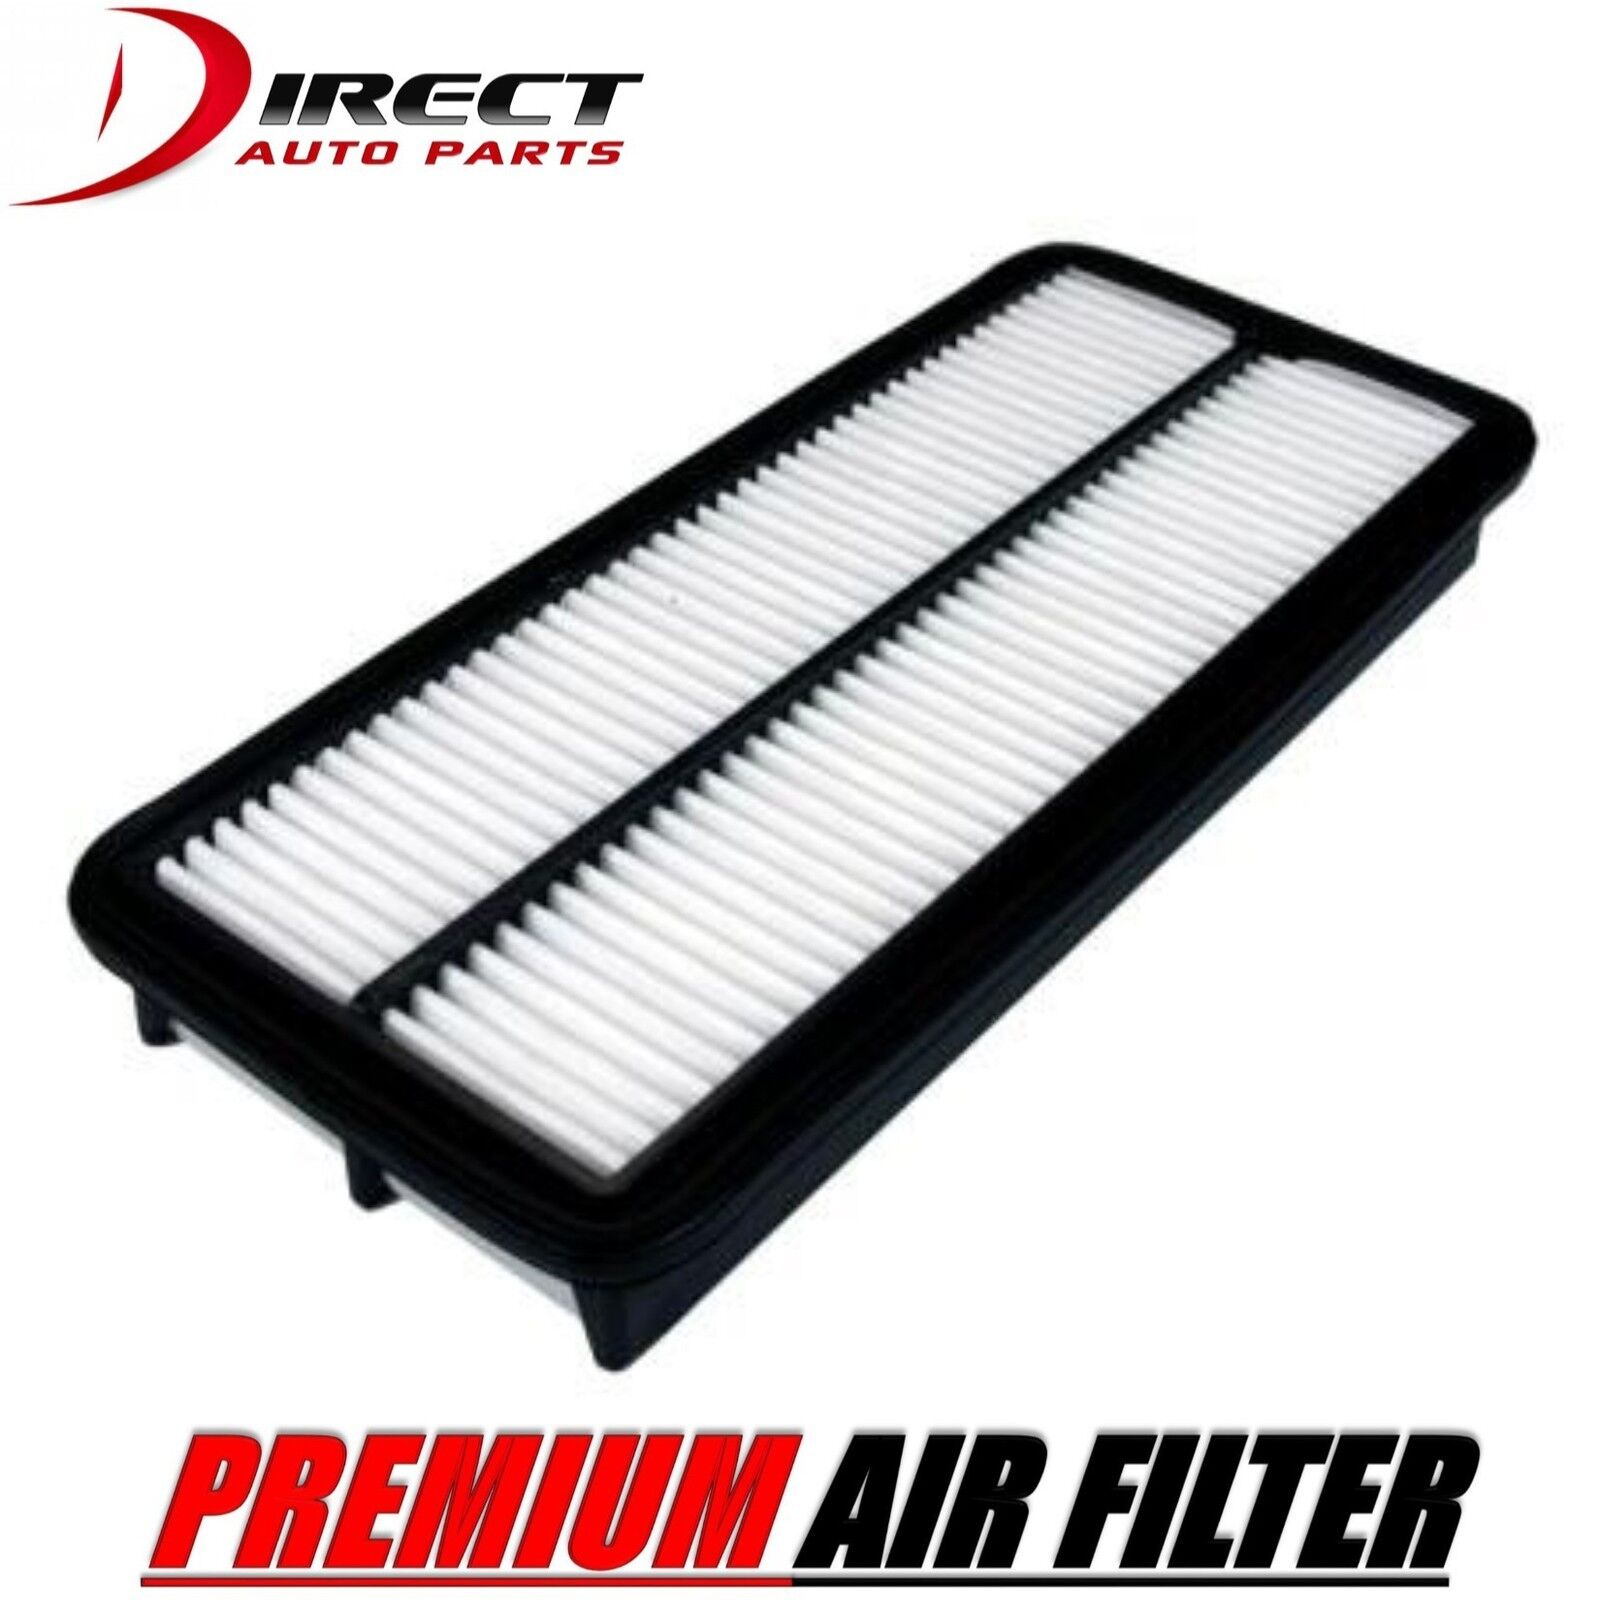 ACURA AIR FILTER FOR ACURA RL 3.5L ENGINE 2005 - 2008